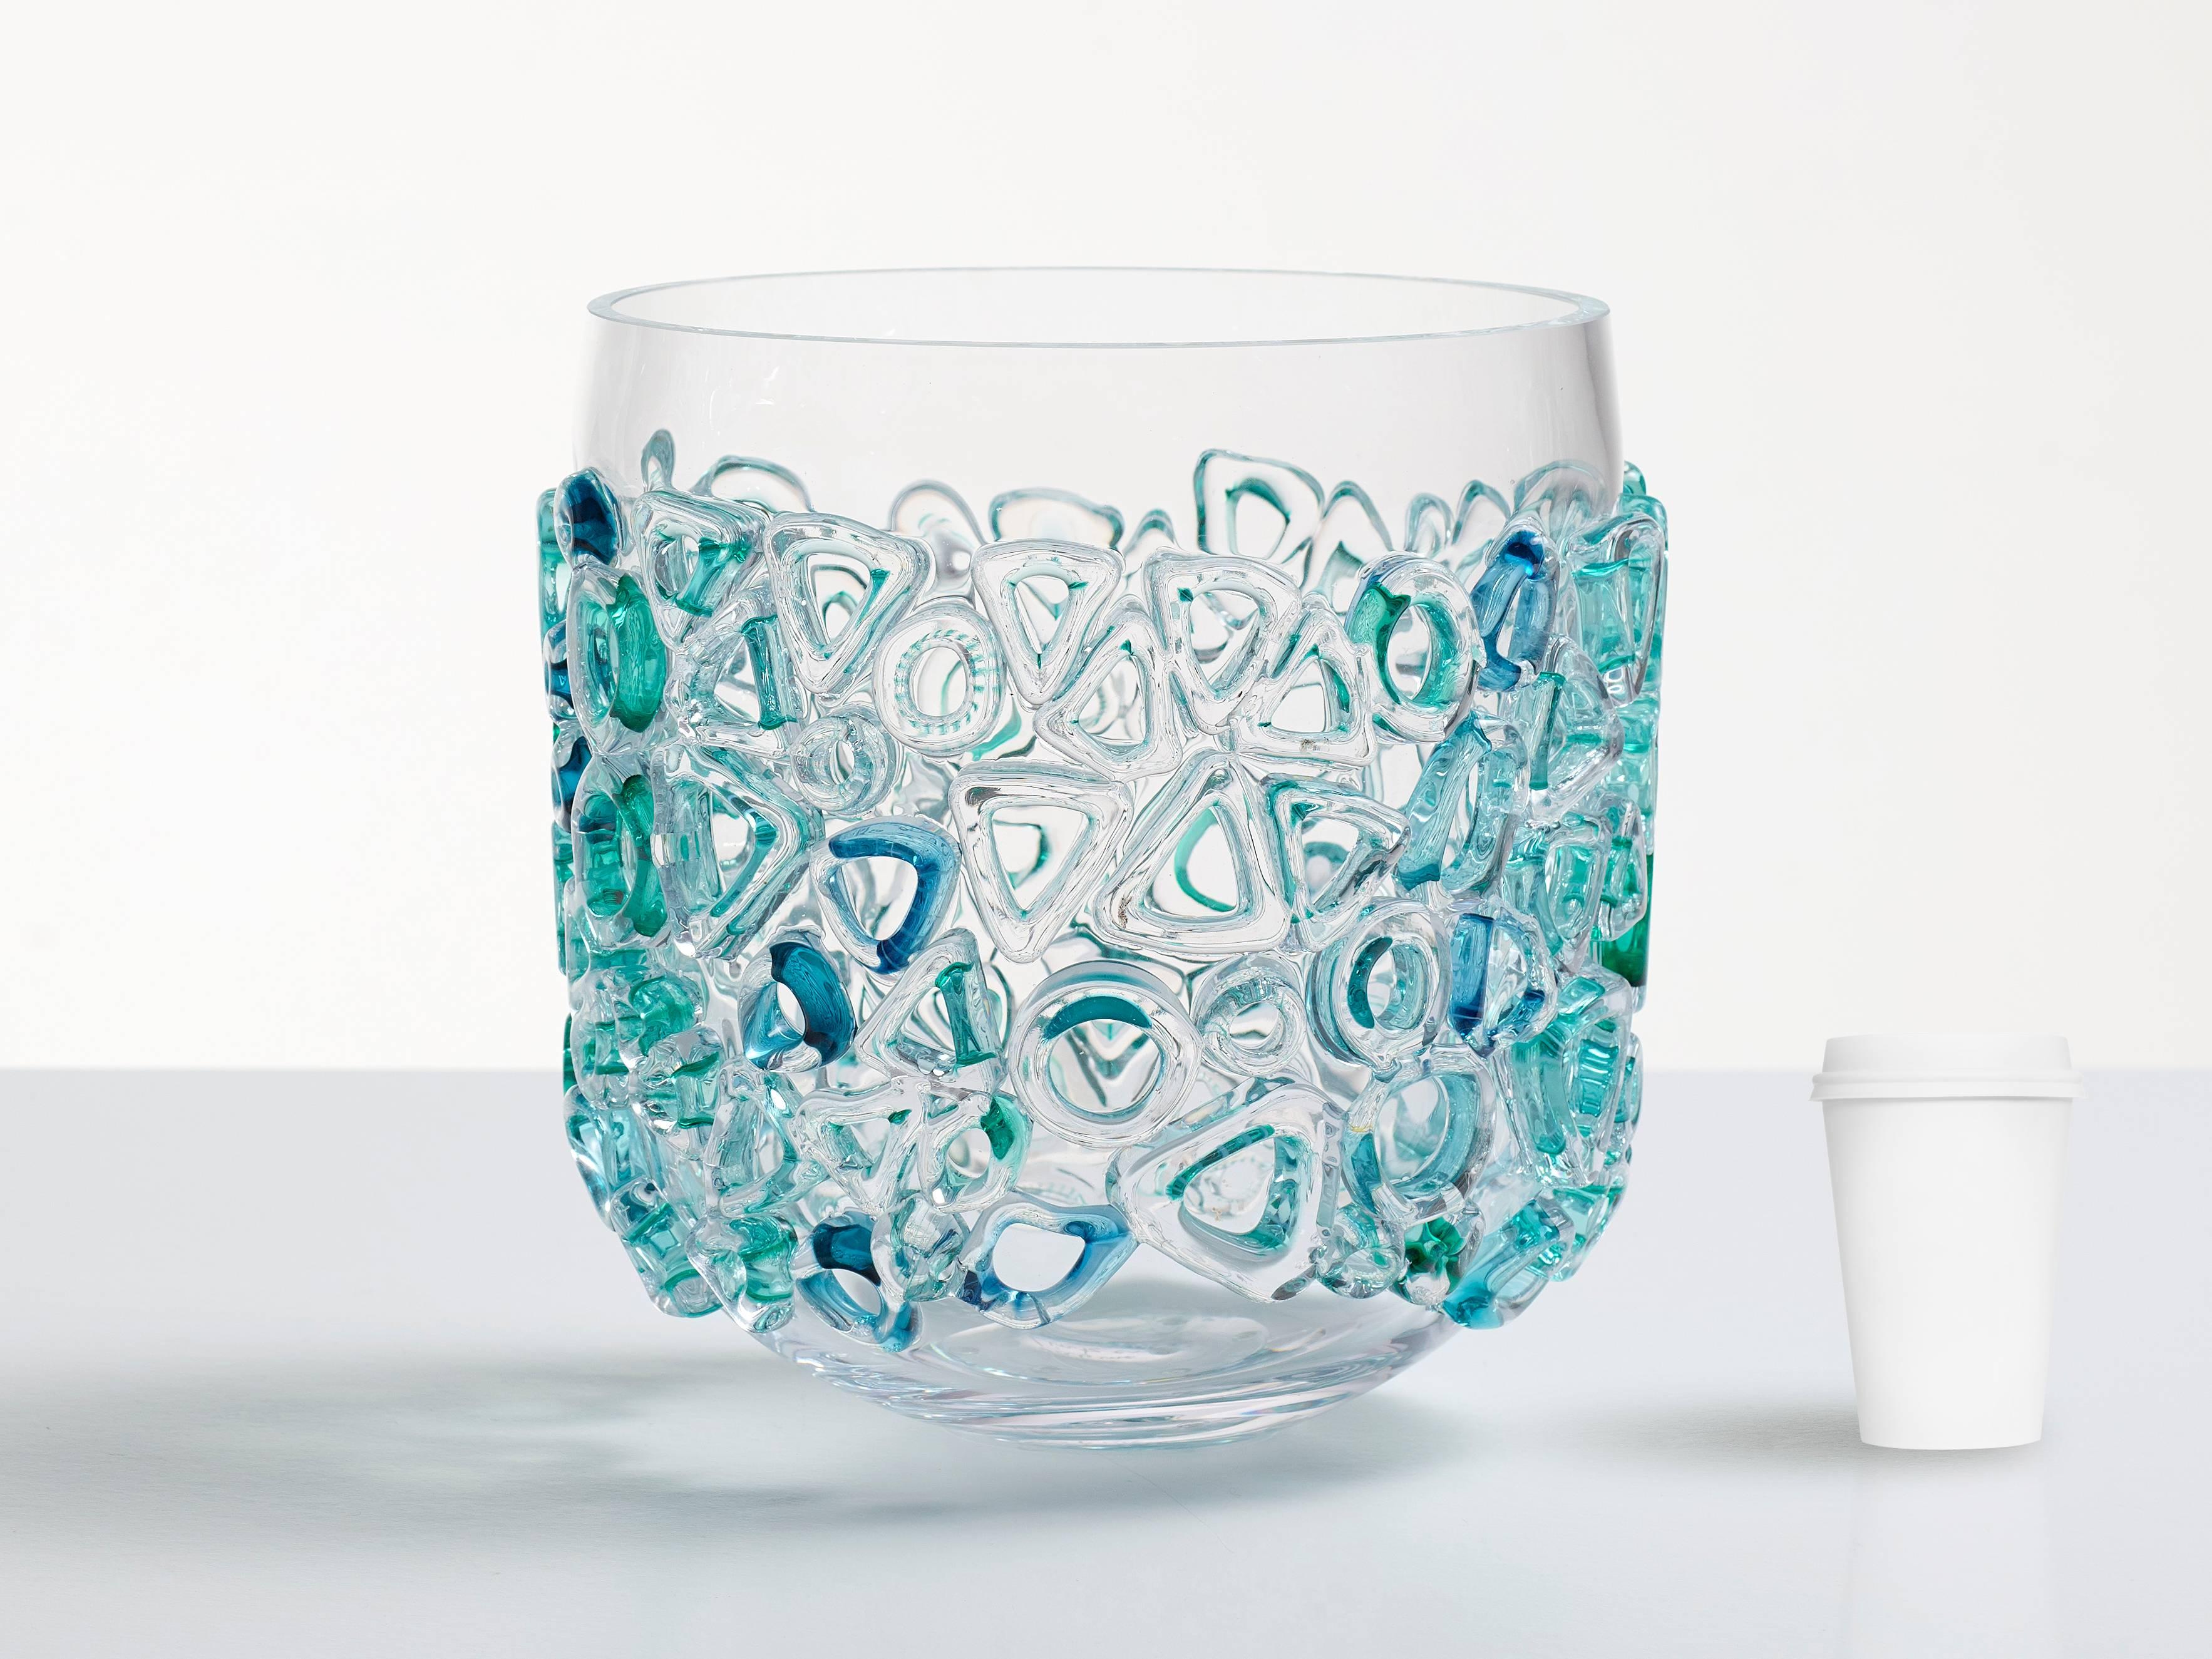 Clear glass vessel. Murano glass style glass bowl, clear glass with blue & green - Sculpture by Sabine Lintzen